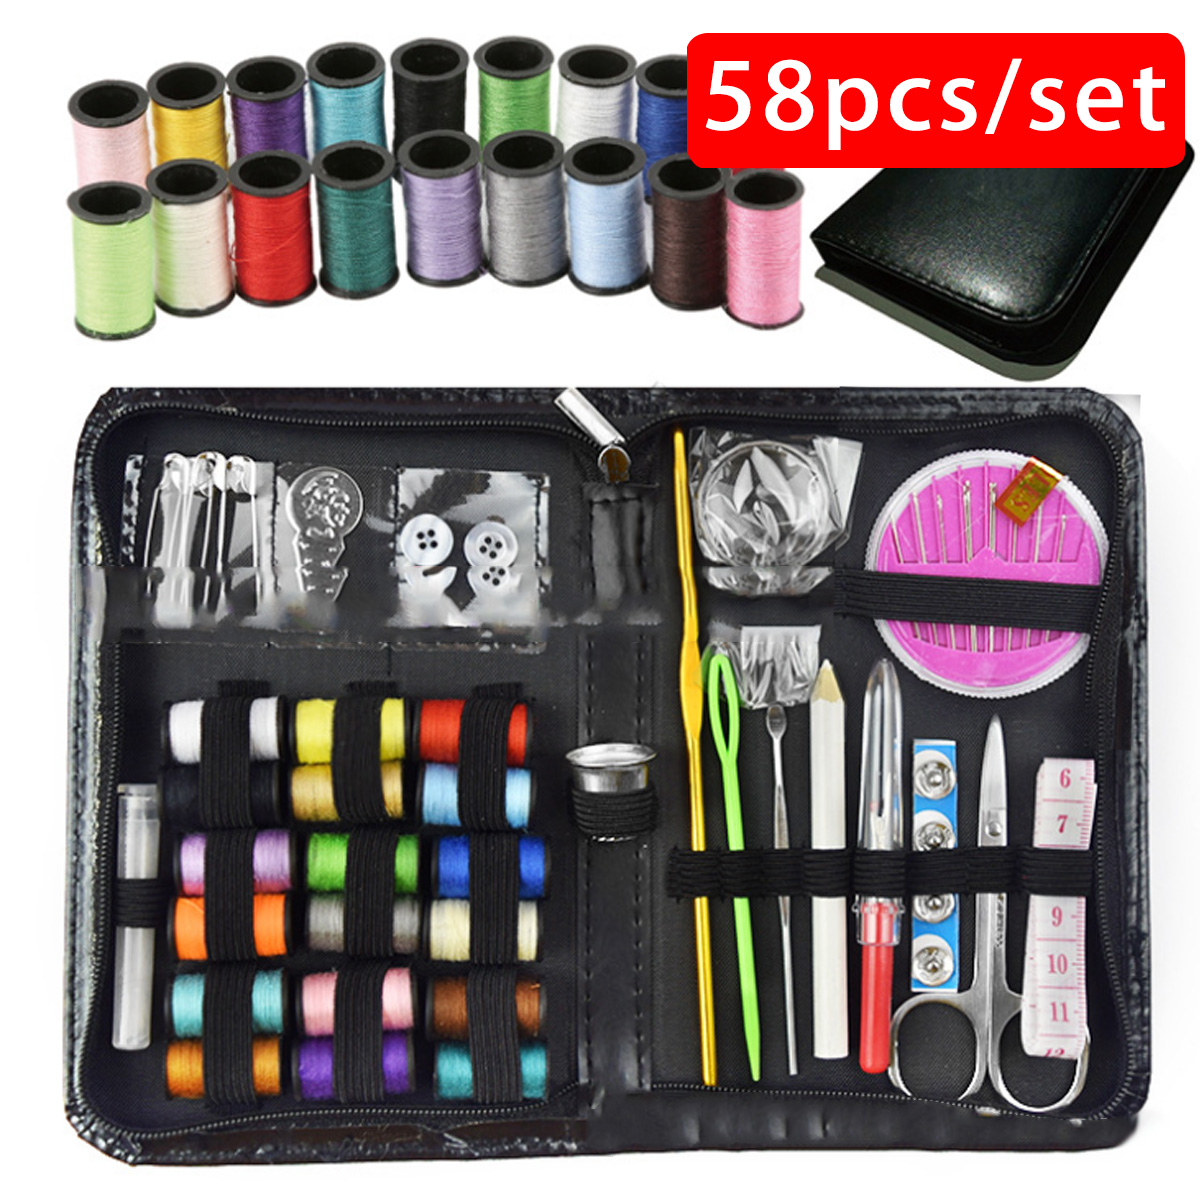 Portable-Travel-Small-Home-Sewing-Kit-Case-Needle-Thread-Scissor-1618823-5